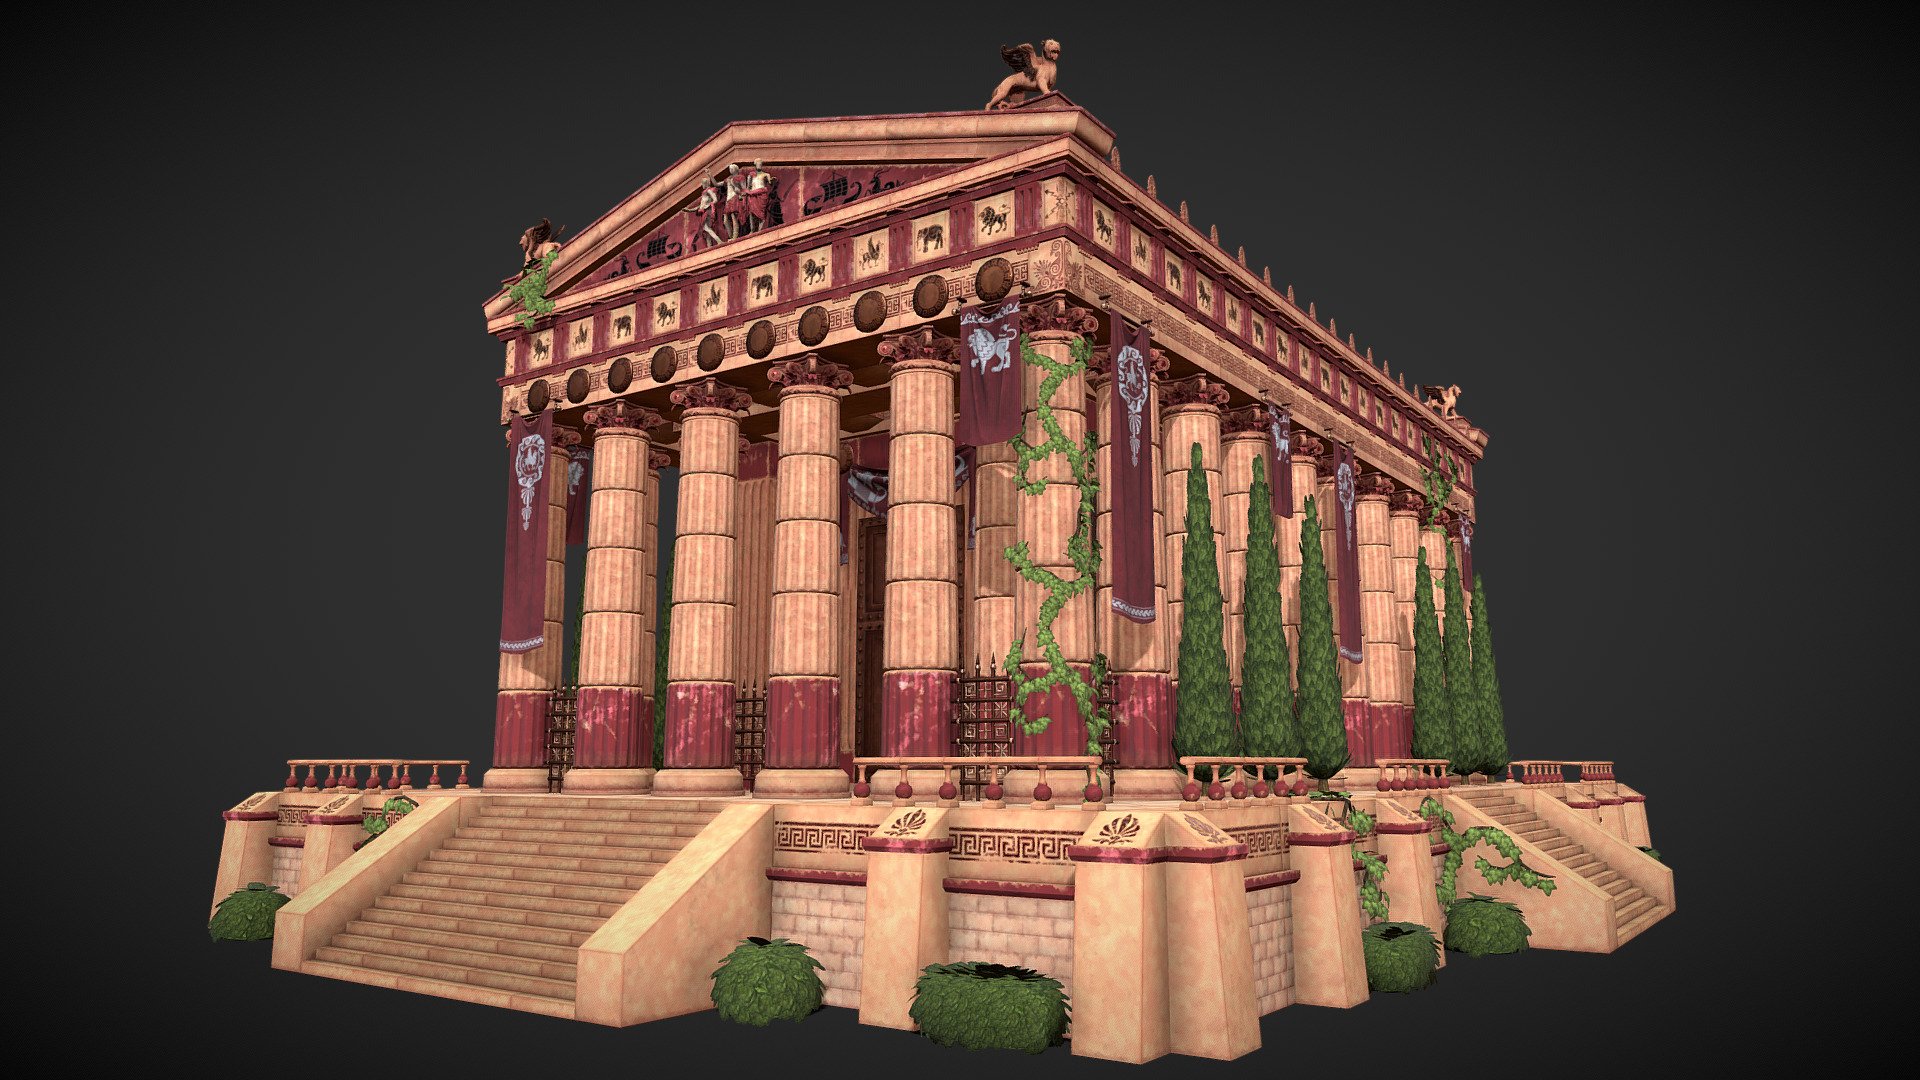 Greek temple in a cartoon style, inspired by &ldquo;immortals fenyx rising